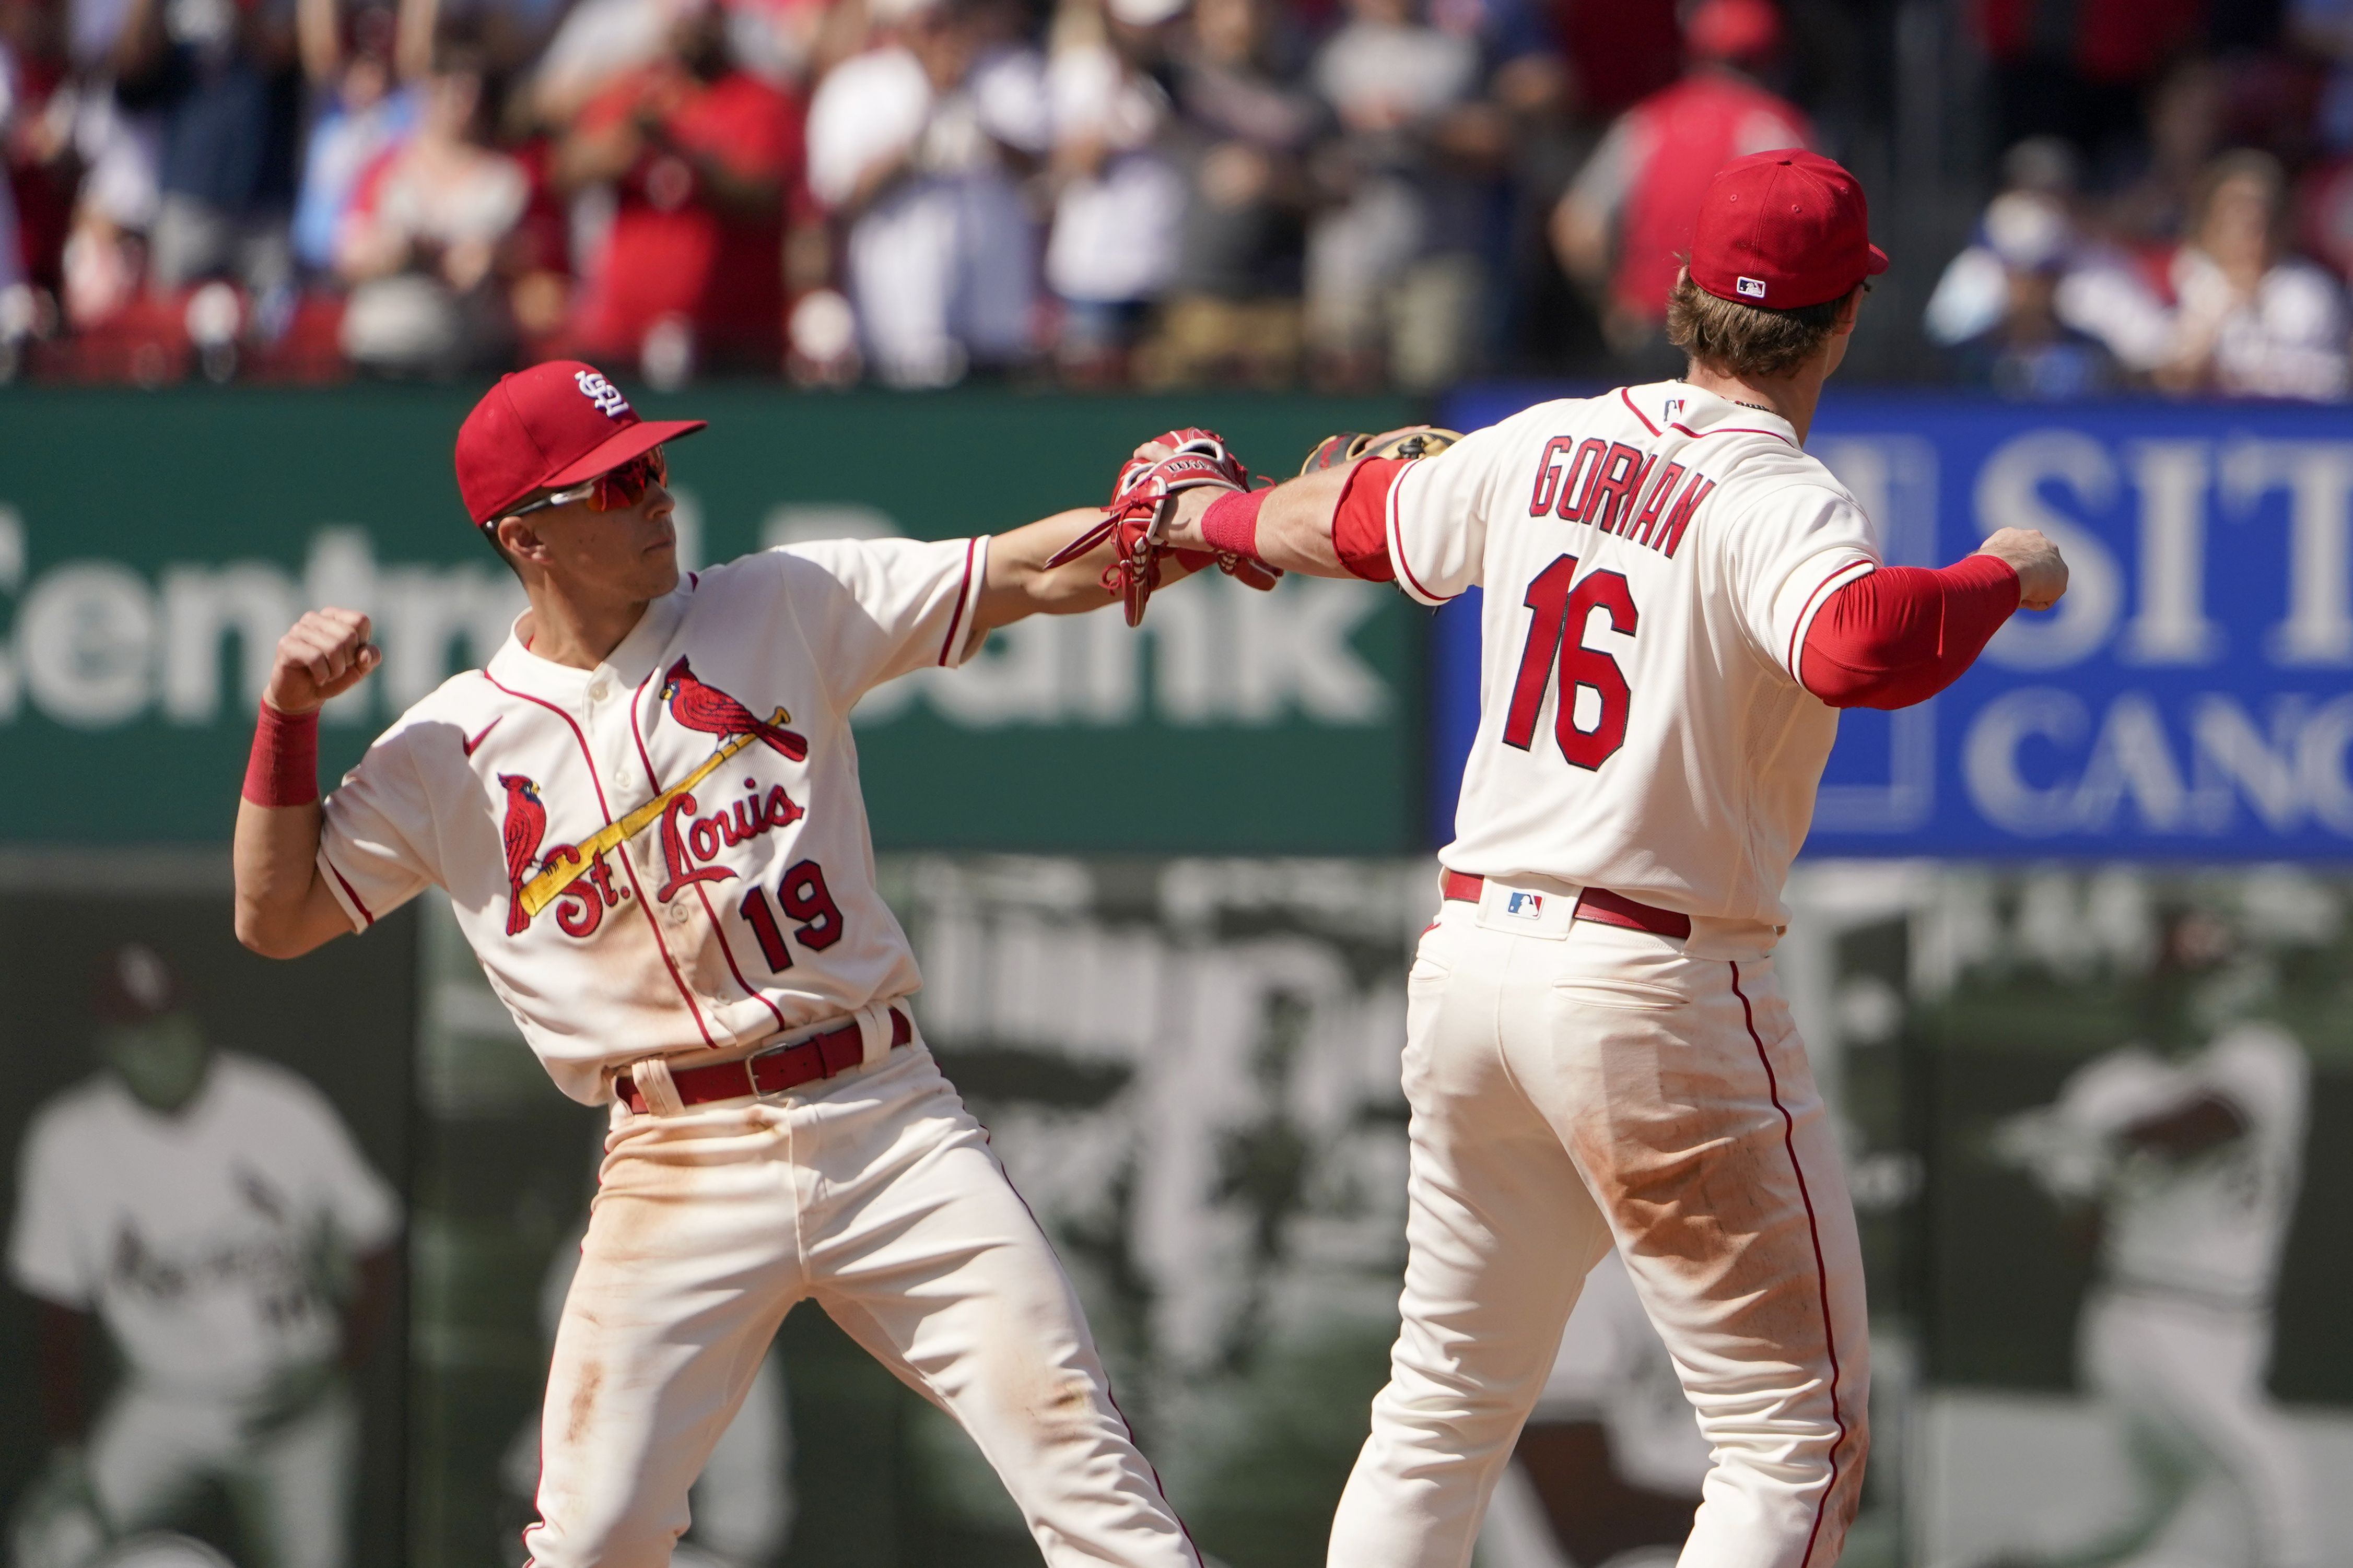 Gorman homers, drives in 4, as Cardinals rout Brewers